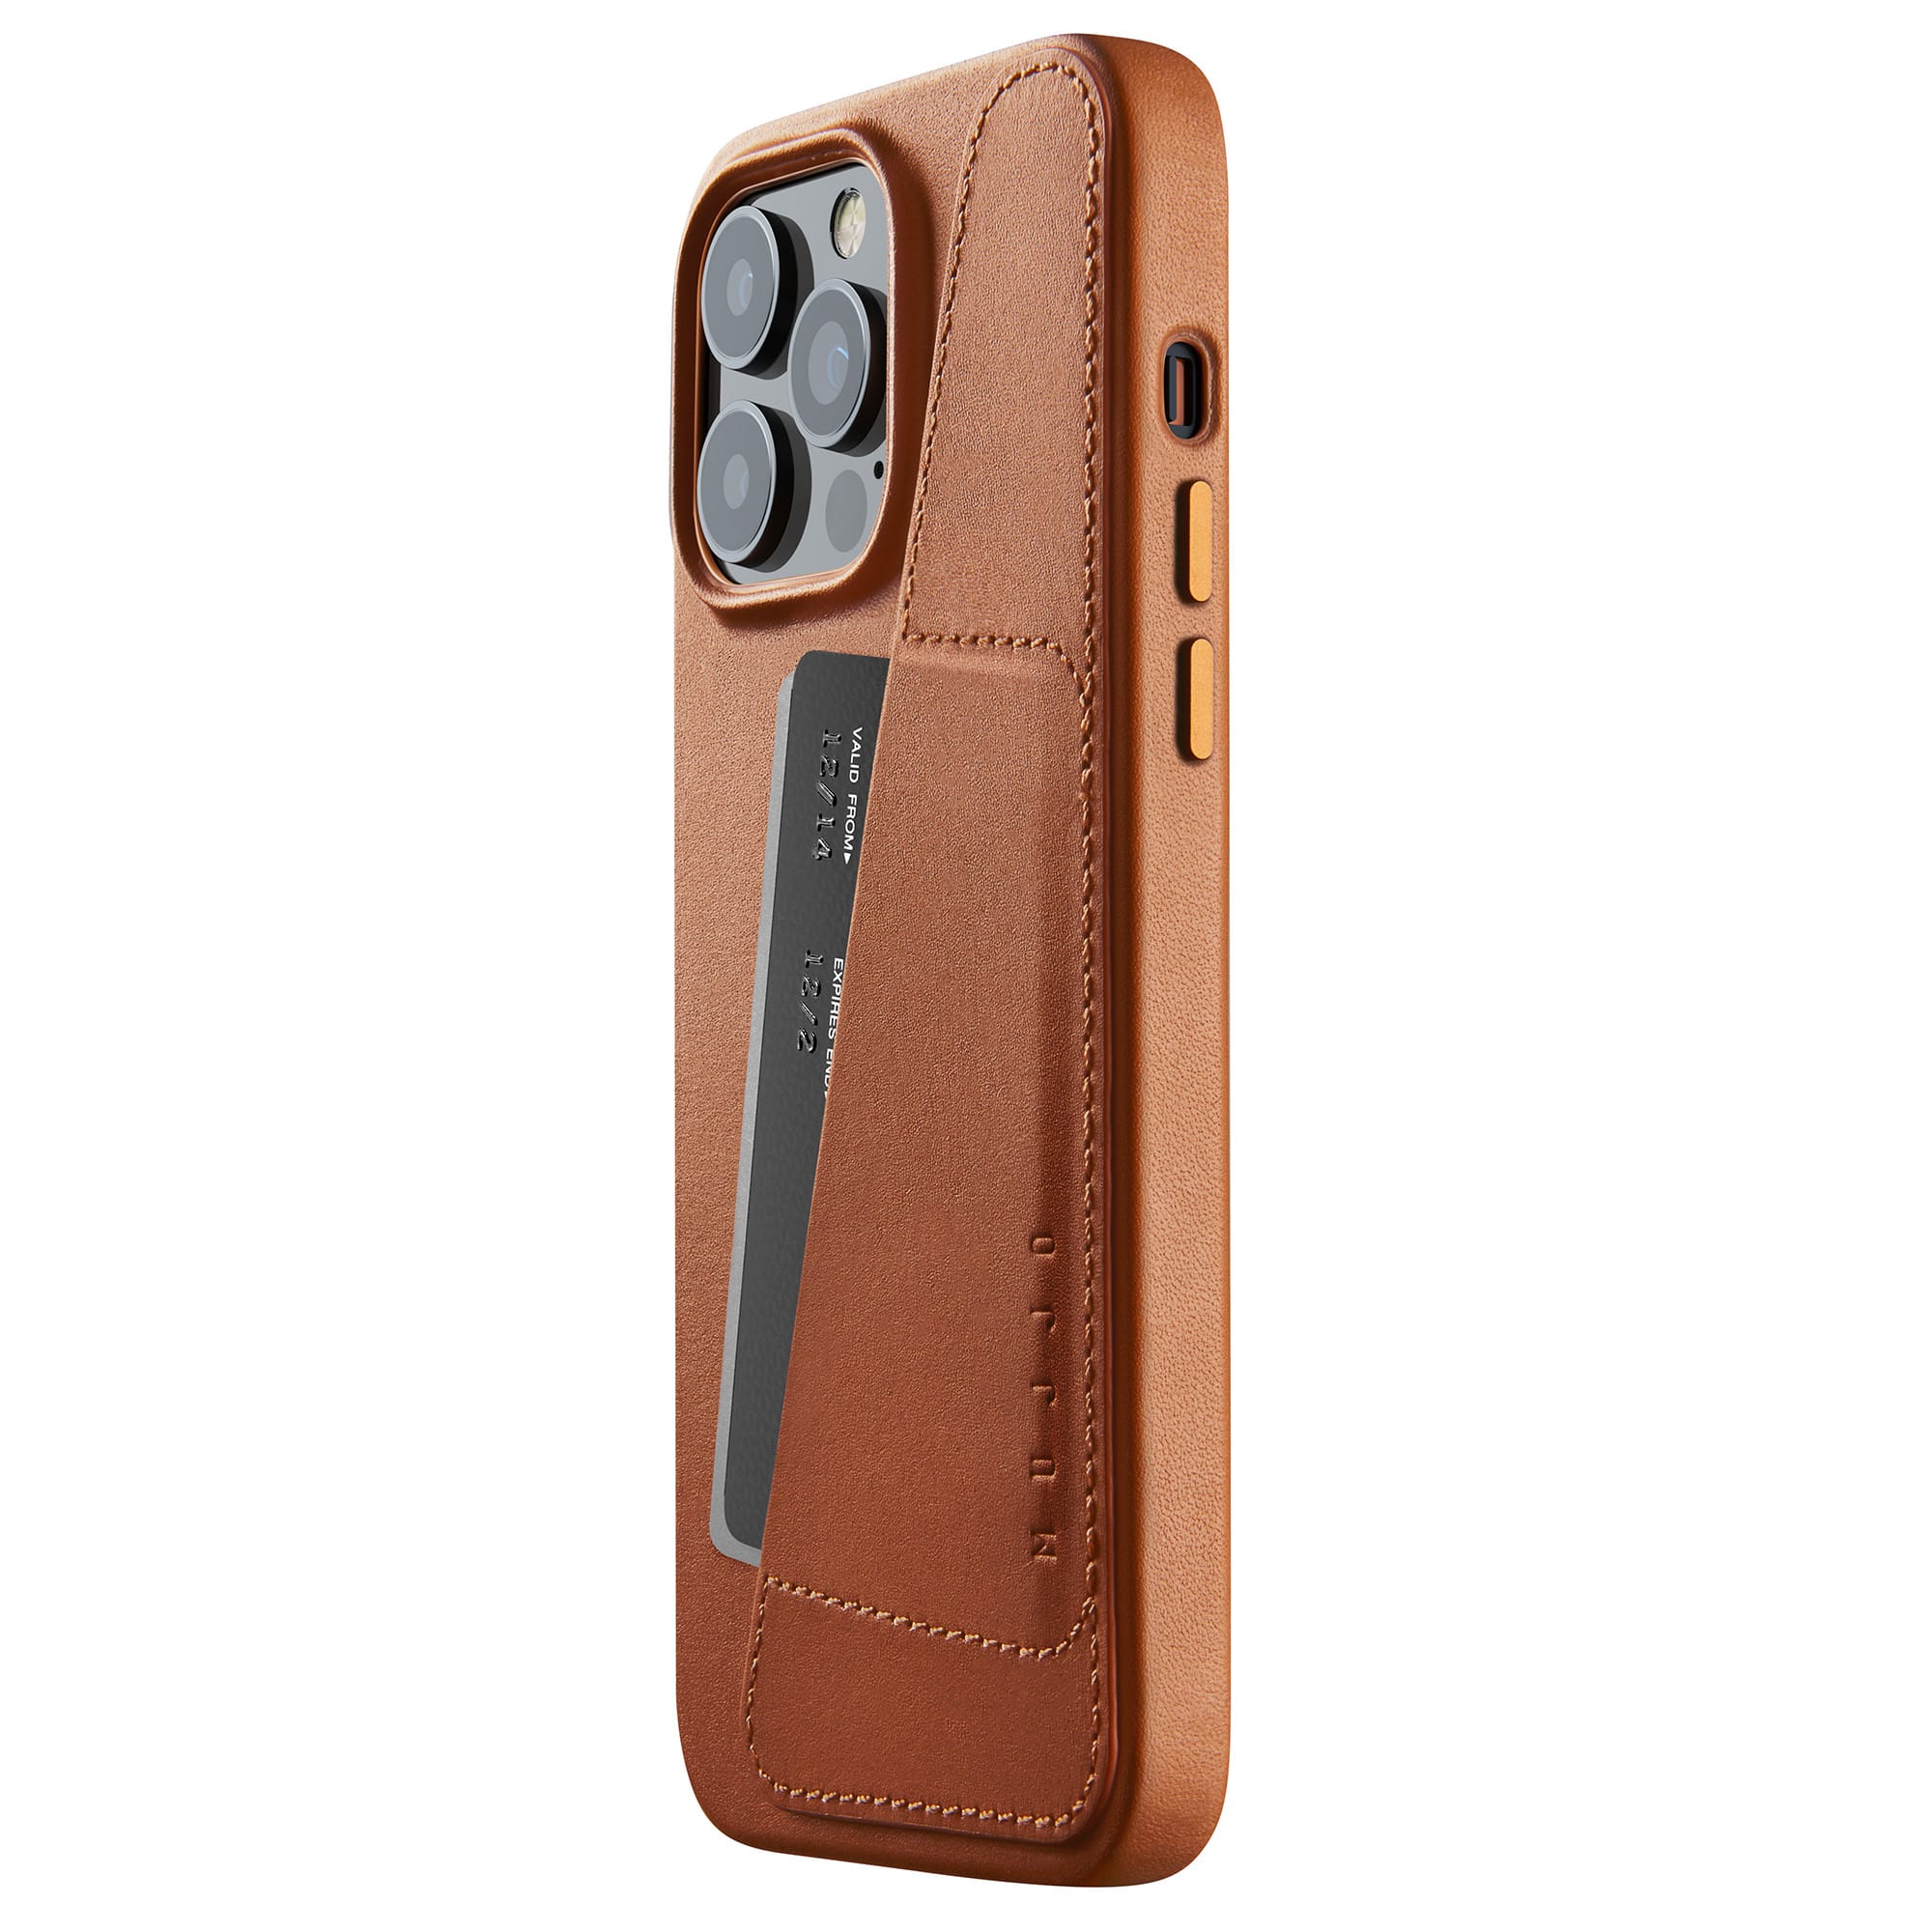 Mujjo Full Leather Wallet Case for iPhone 12 / iPhone 12 Pro